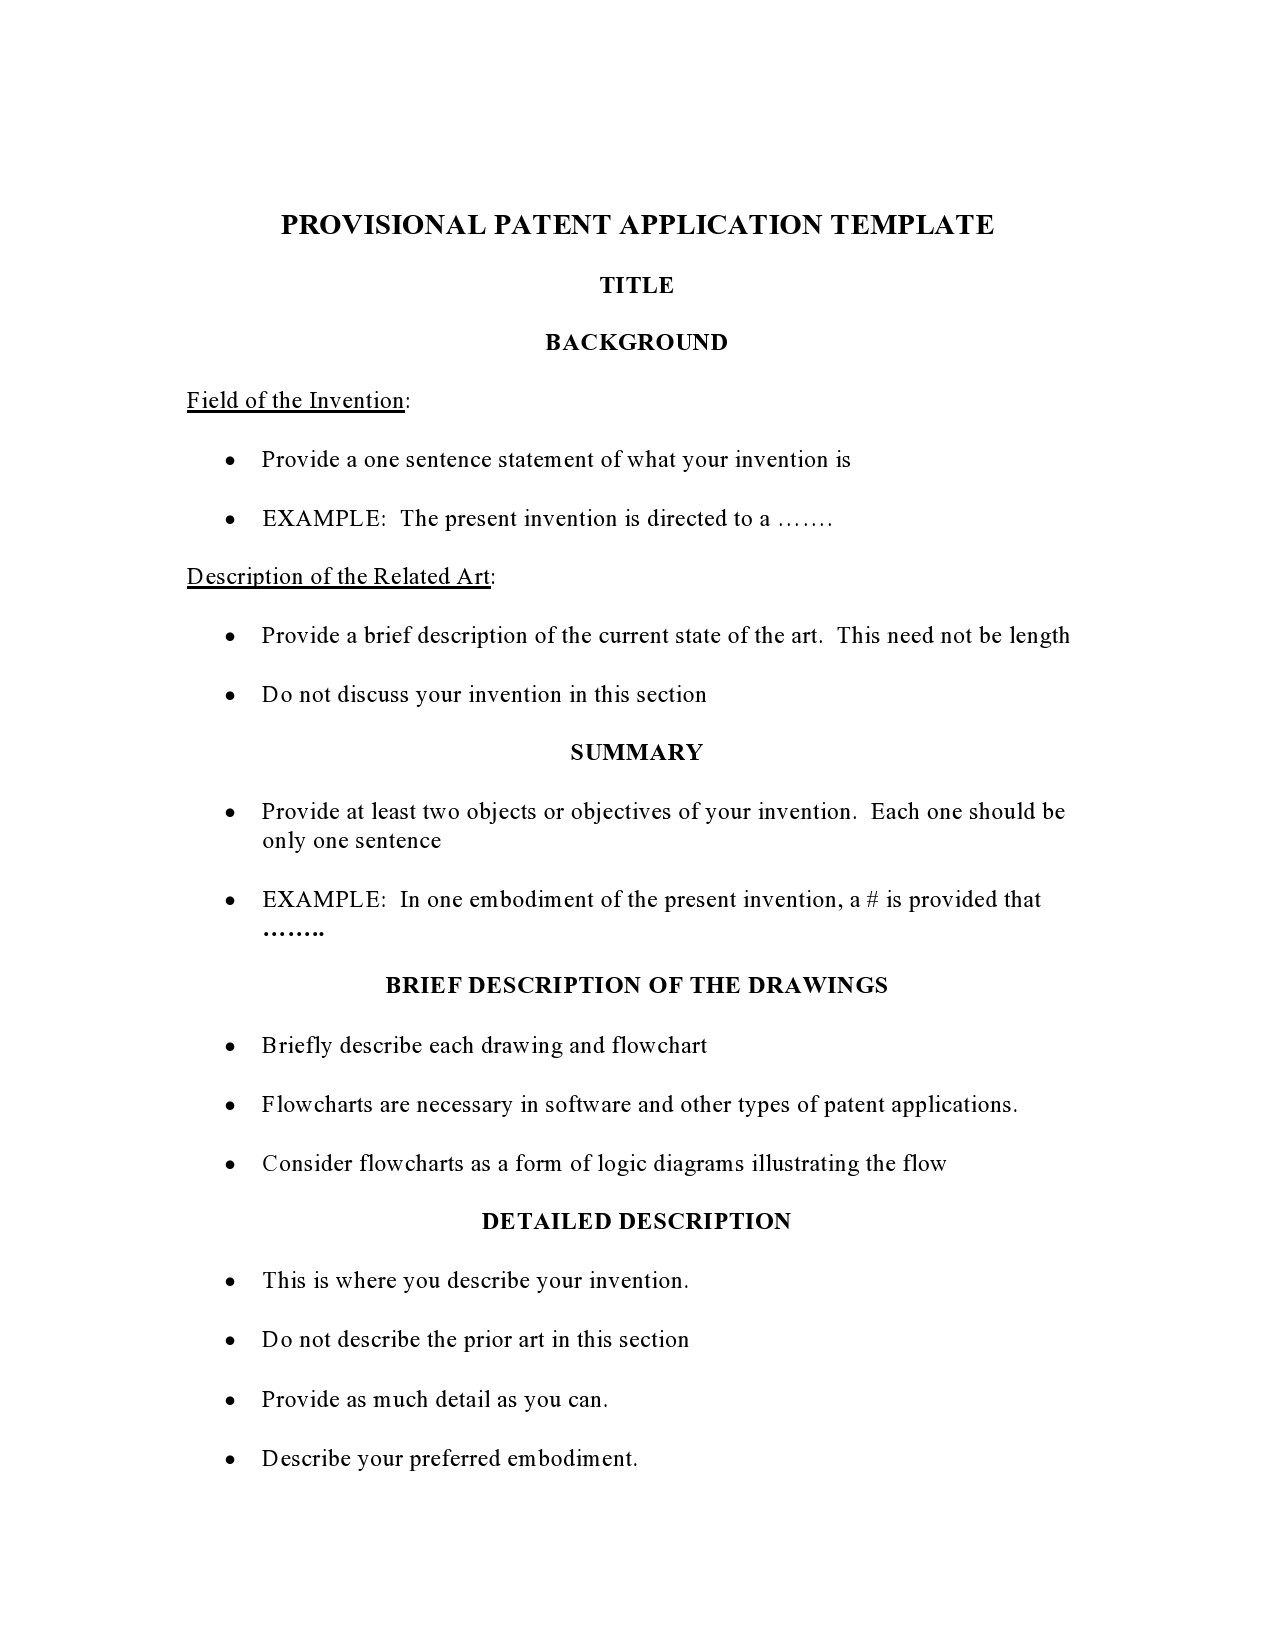 Free provisional patent application template 06